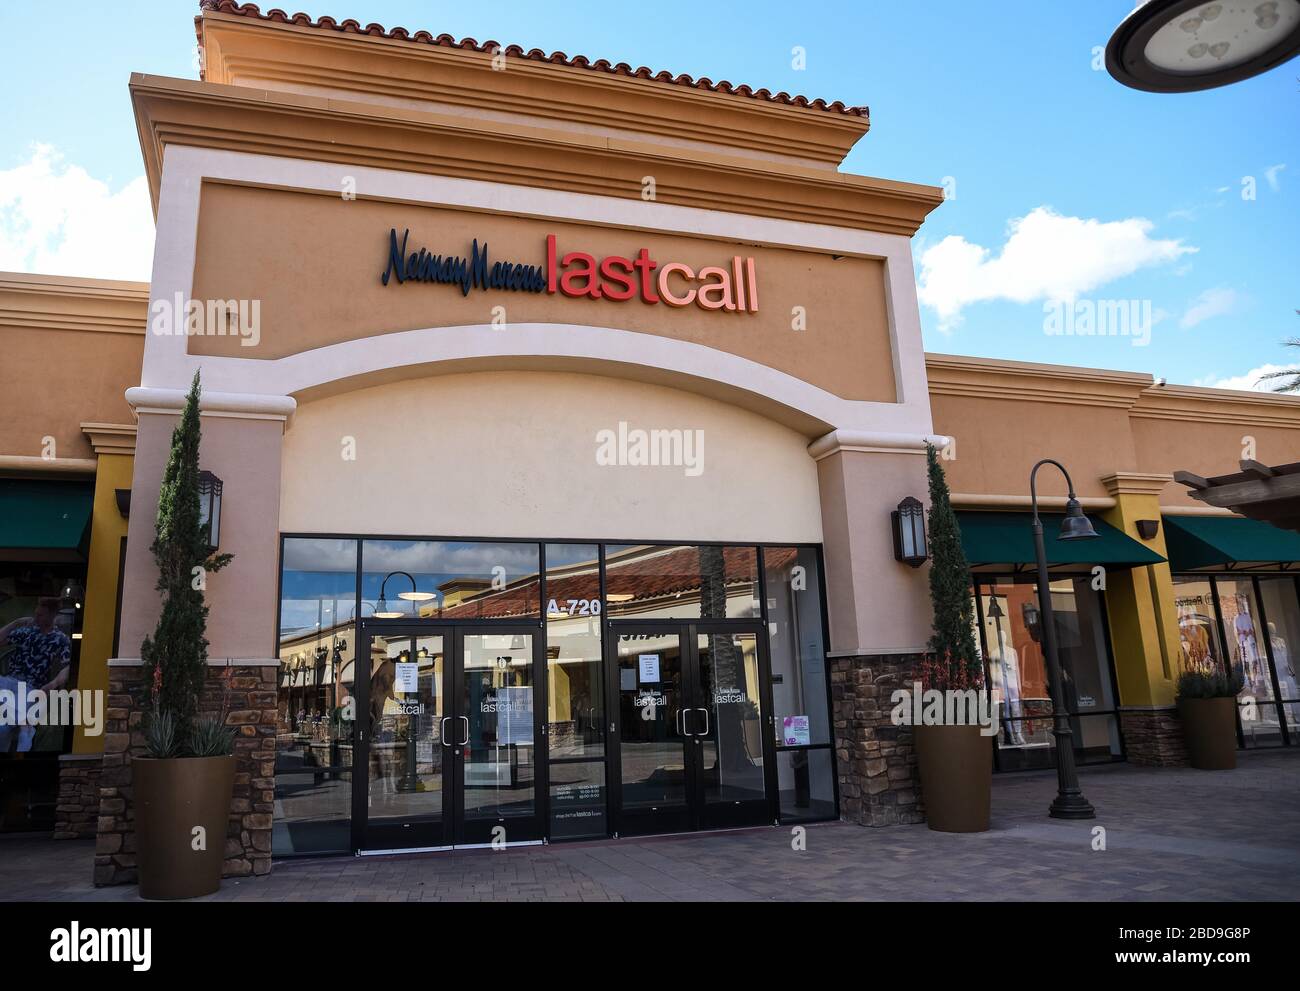 March 17, 2020: Neiman Marcus Last Call retail stores at the outdoor mall Cabazon Outlets are open but largely empty due to Covid-19 Corona virus in Cabazon, California John Green/CSM Stock Photo